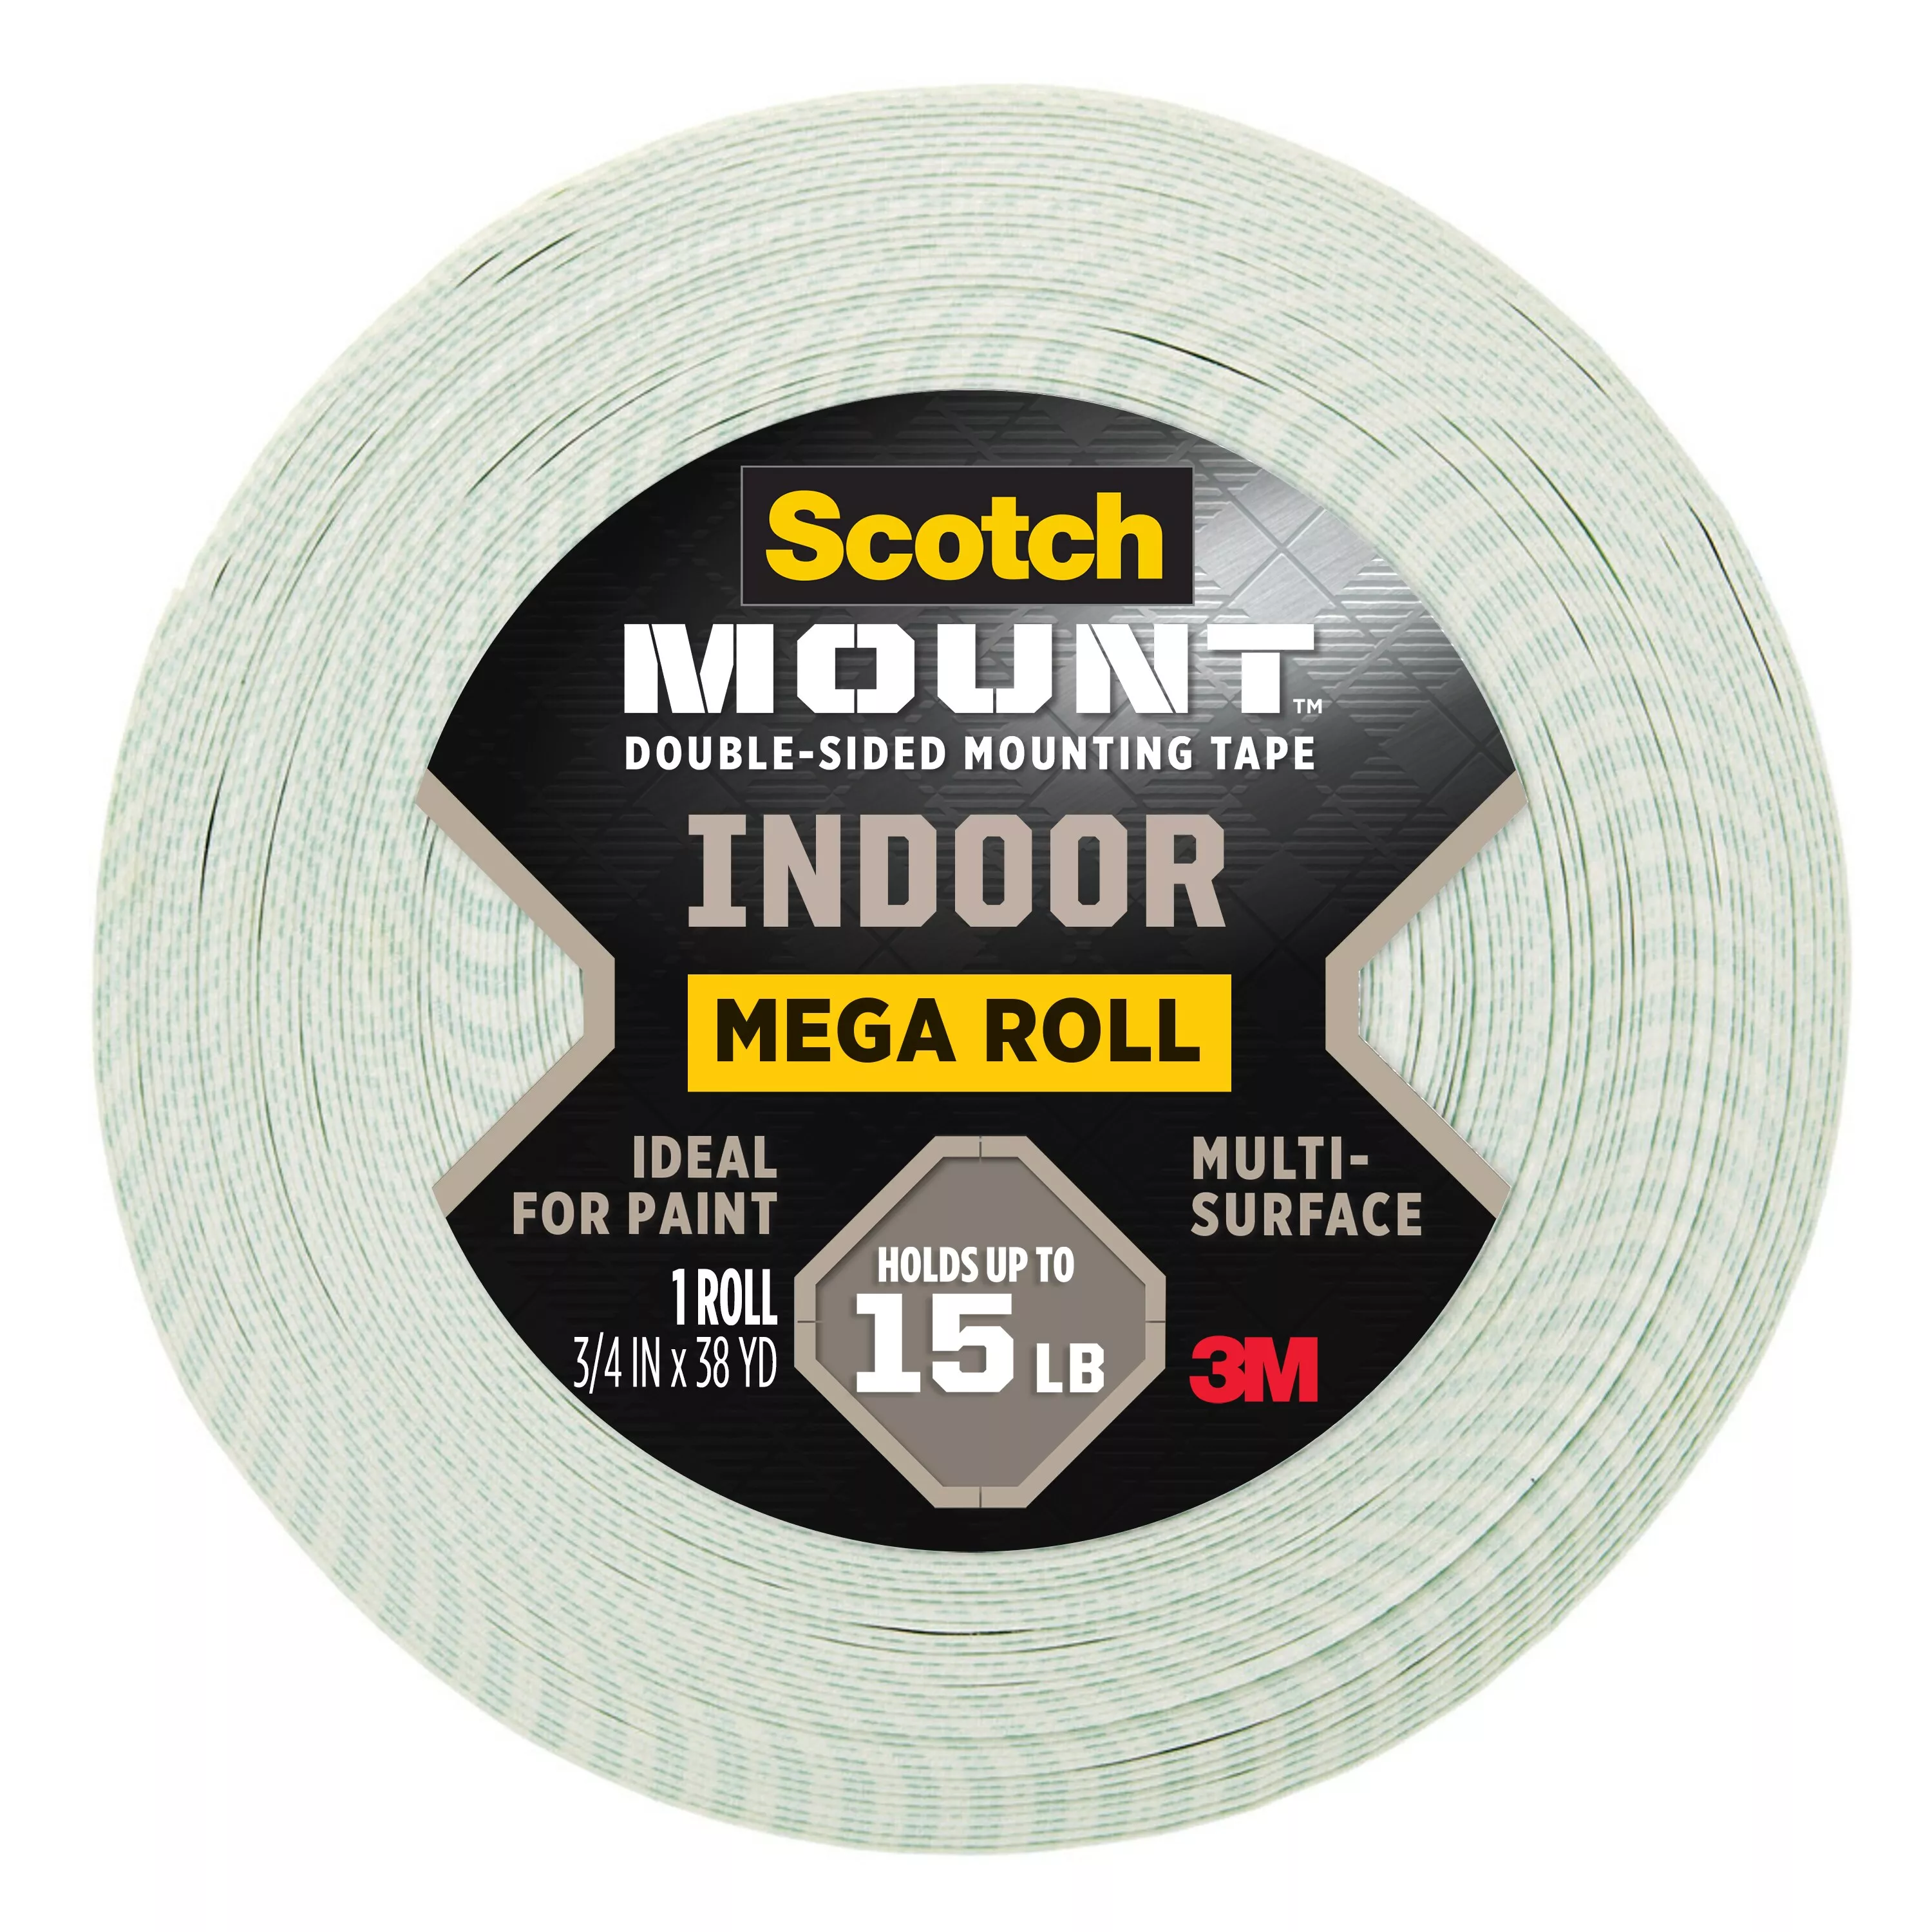 Scotch-Mount™ Indoor Double-Sided Mounting Tape 110H-MR, 3/4 in x 38 yd (1.9 cm x 34.75 m)